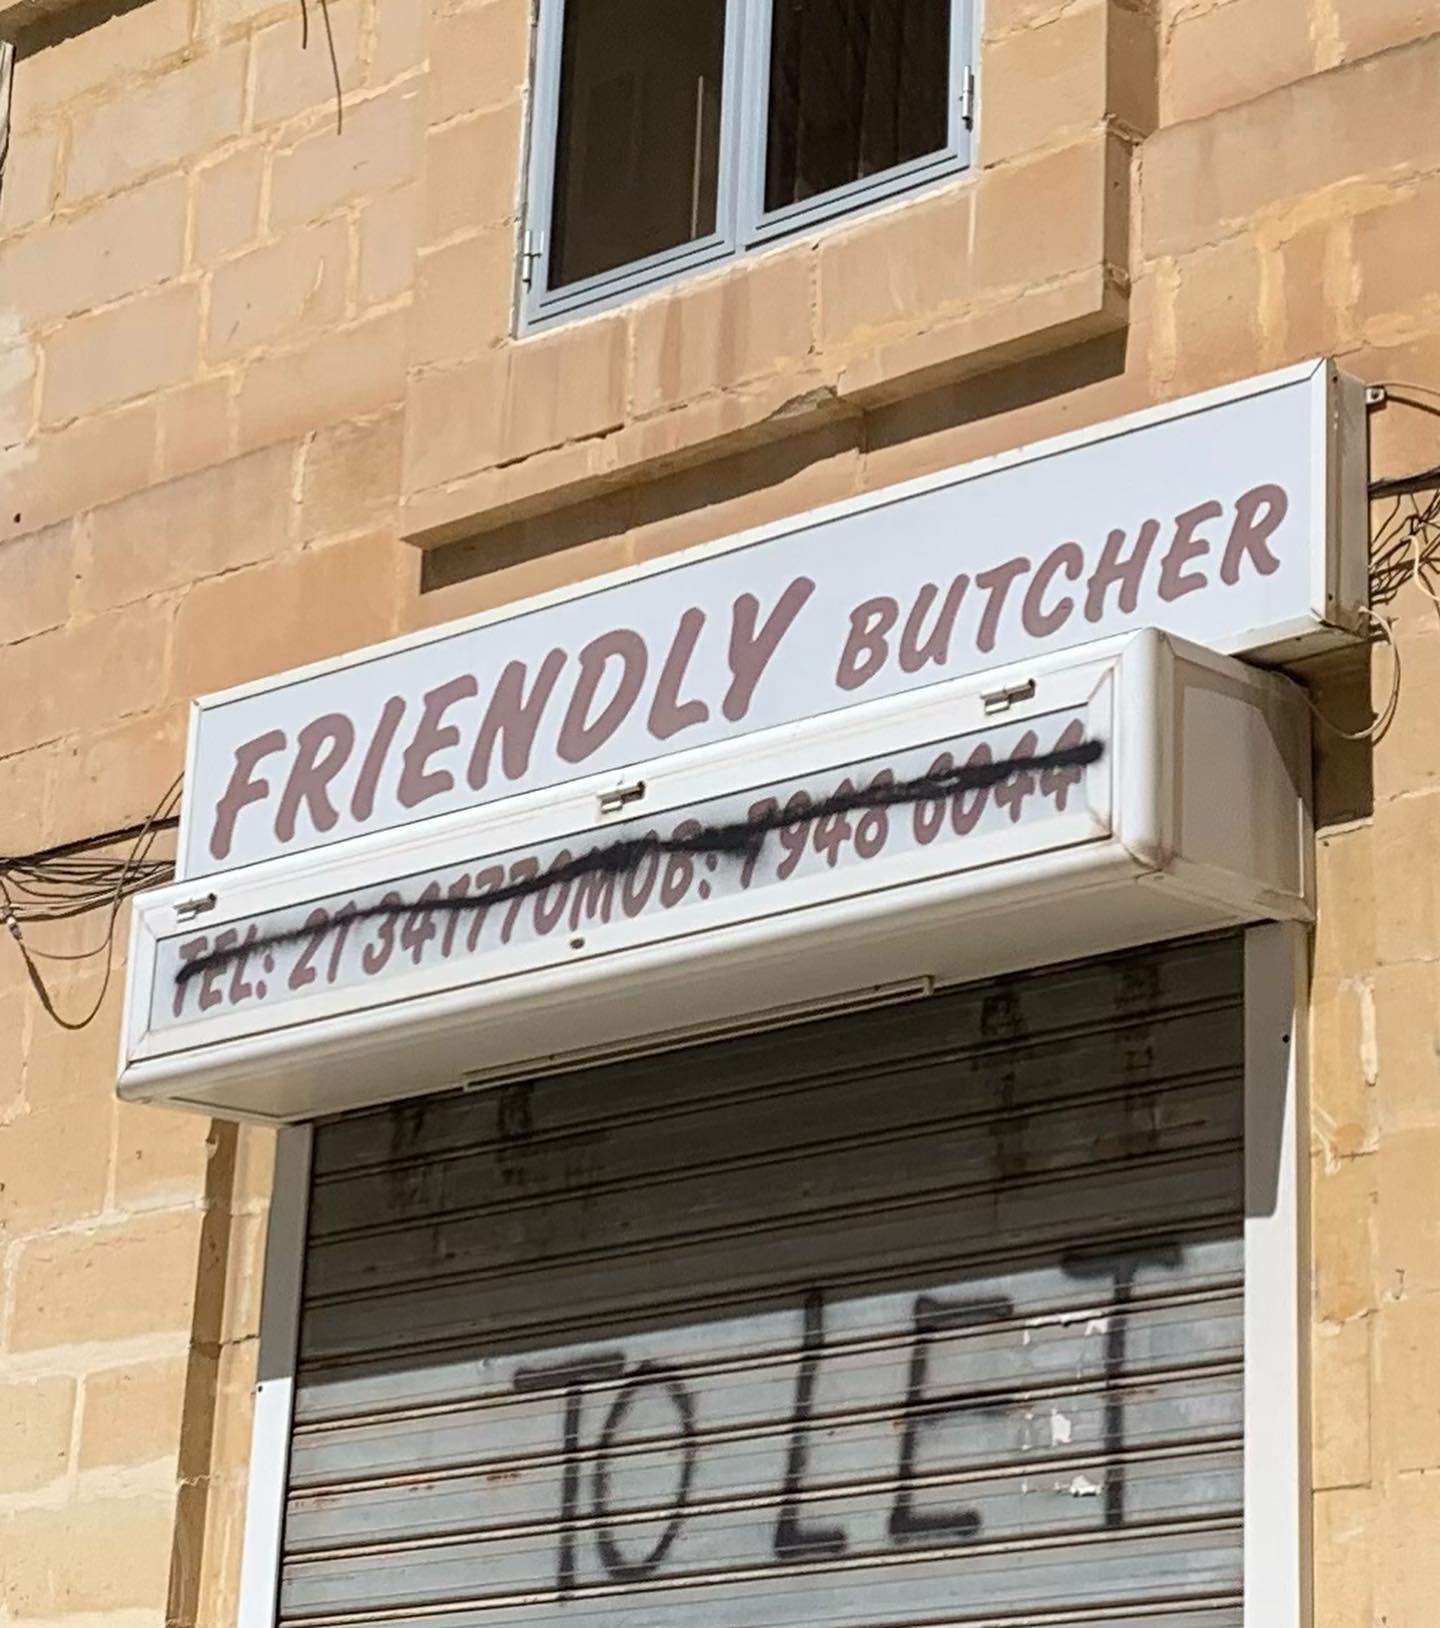 From now on i would like to be called “The friendly butcher” #malta #friendlybutcher